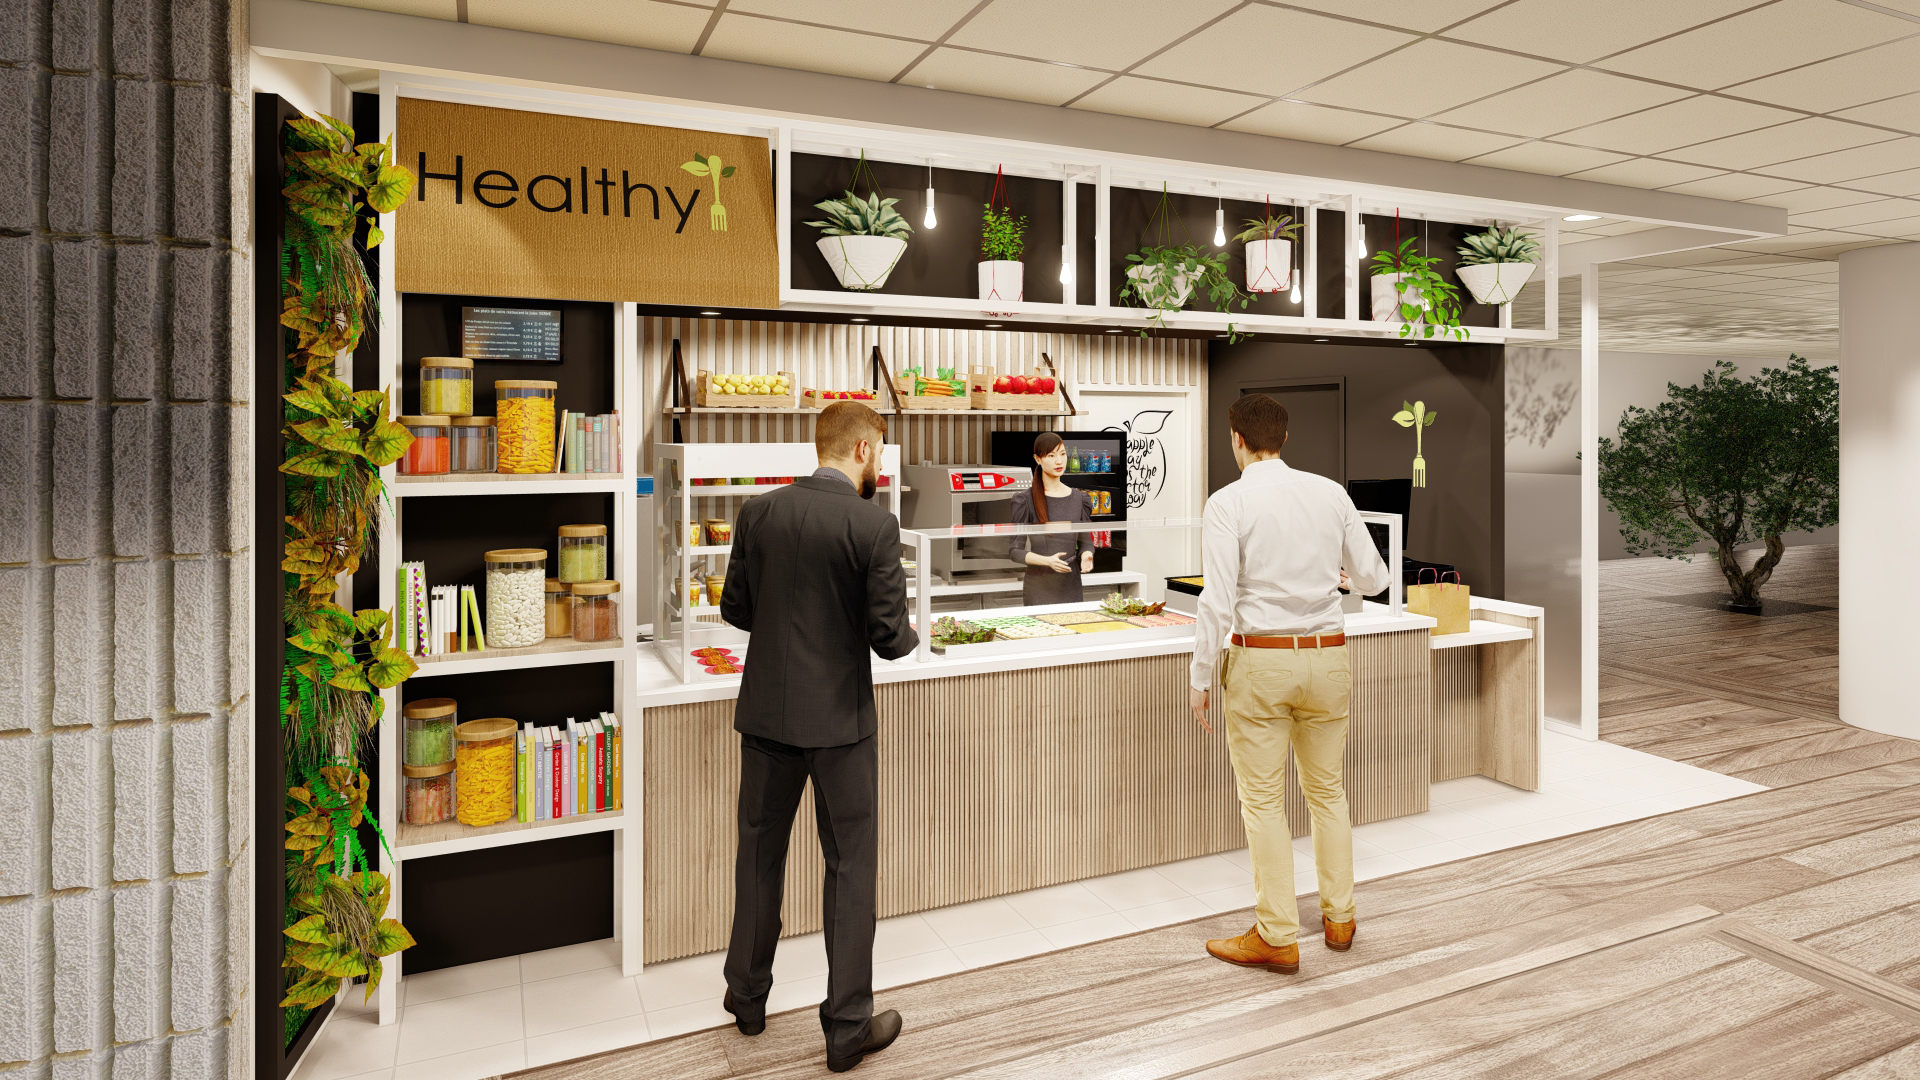 487-Asia_Healthy - Stand 03